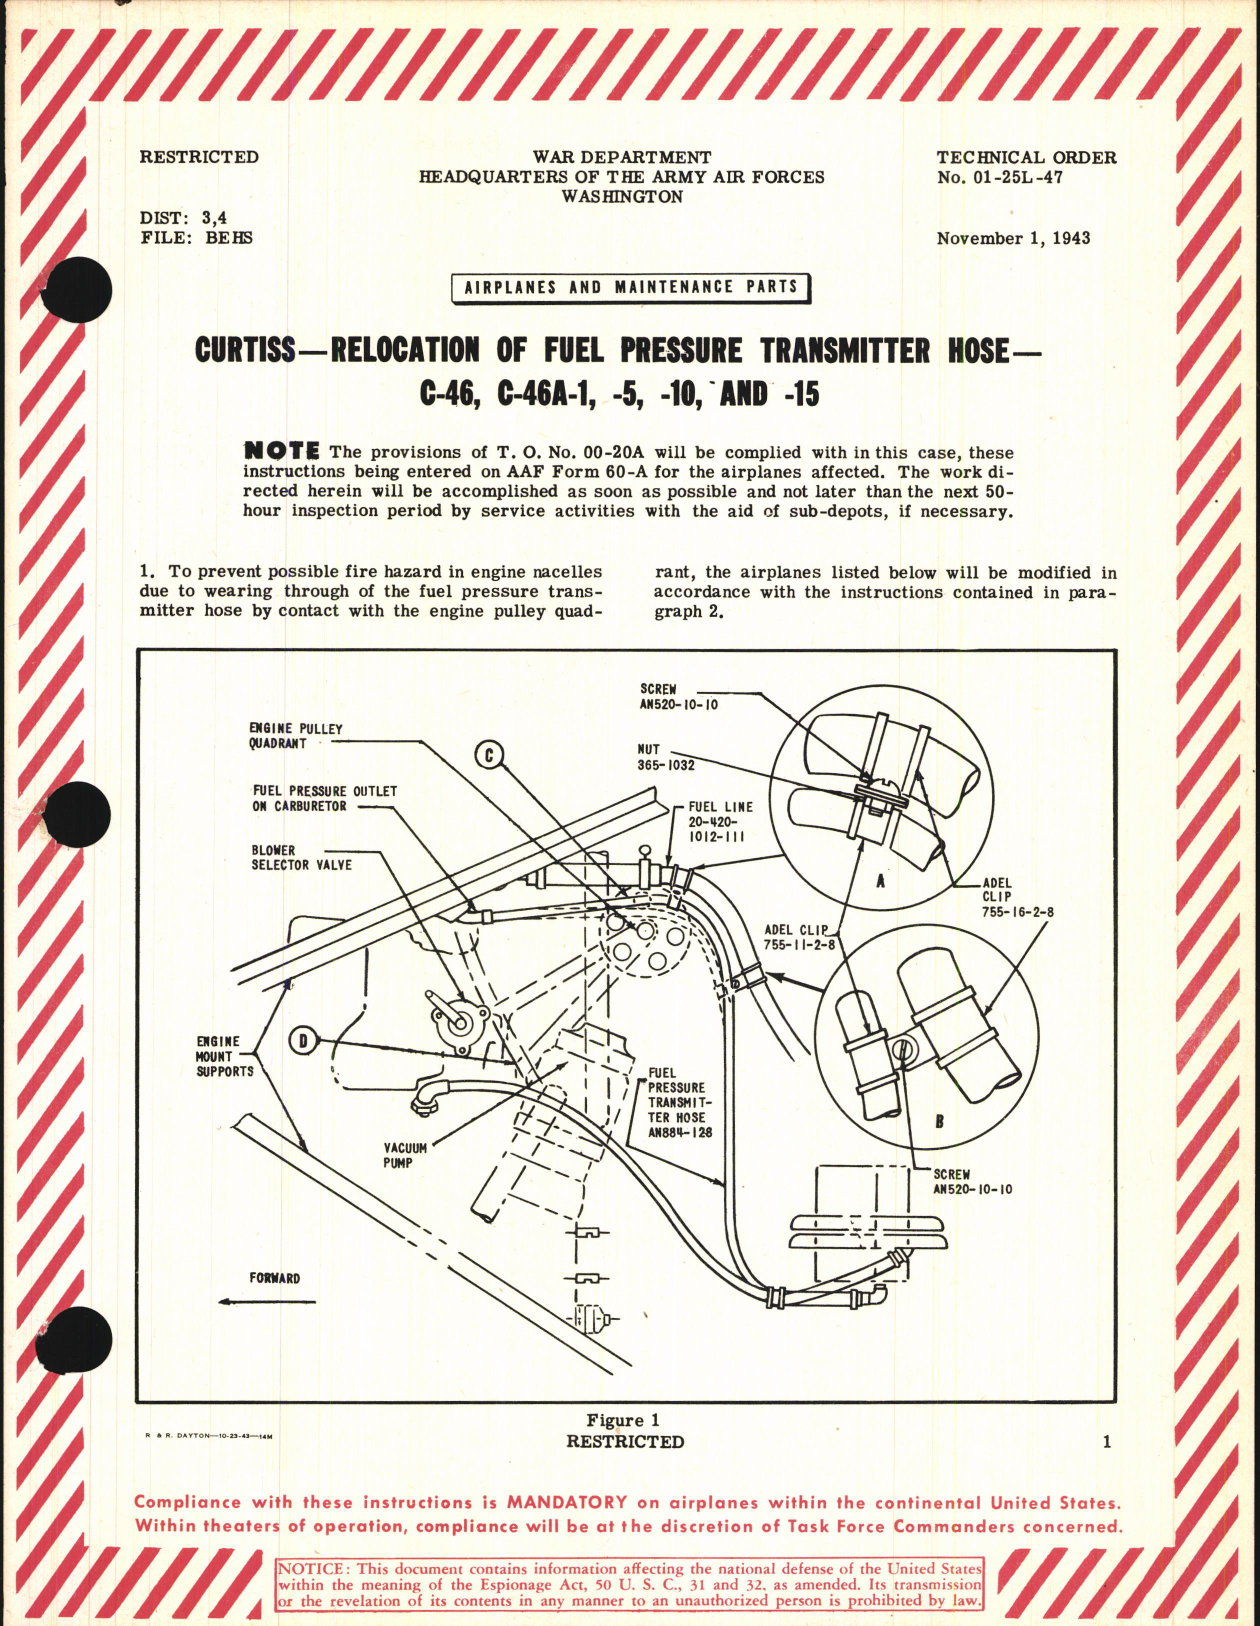 Sample page 1 from AirCorps Library document: Relocation of Fuel Pressure Transmitter Hose for C-46, C-46A-1, -5, -10, and -15